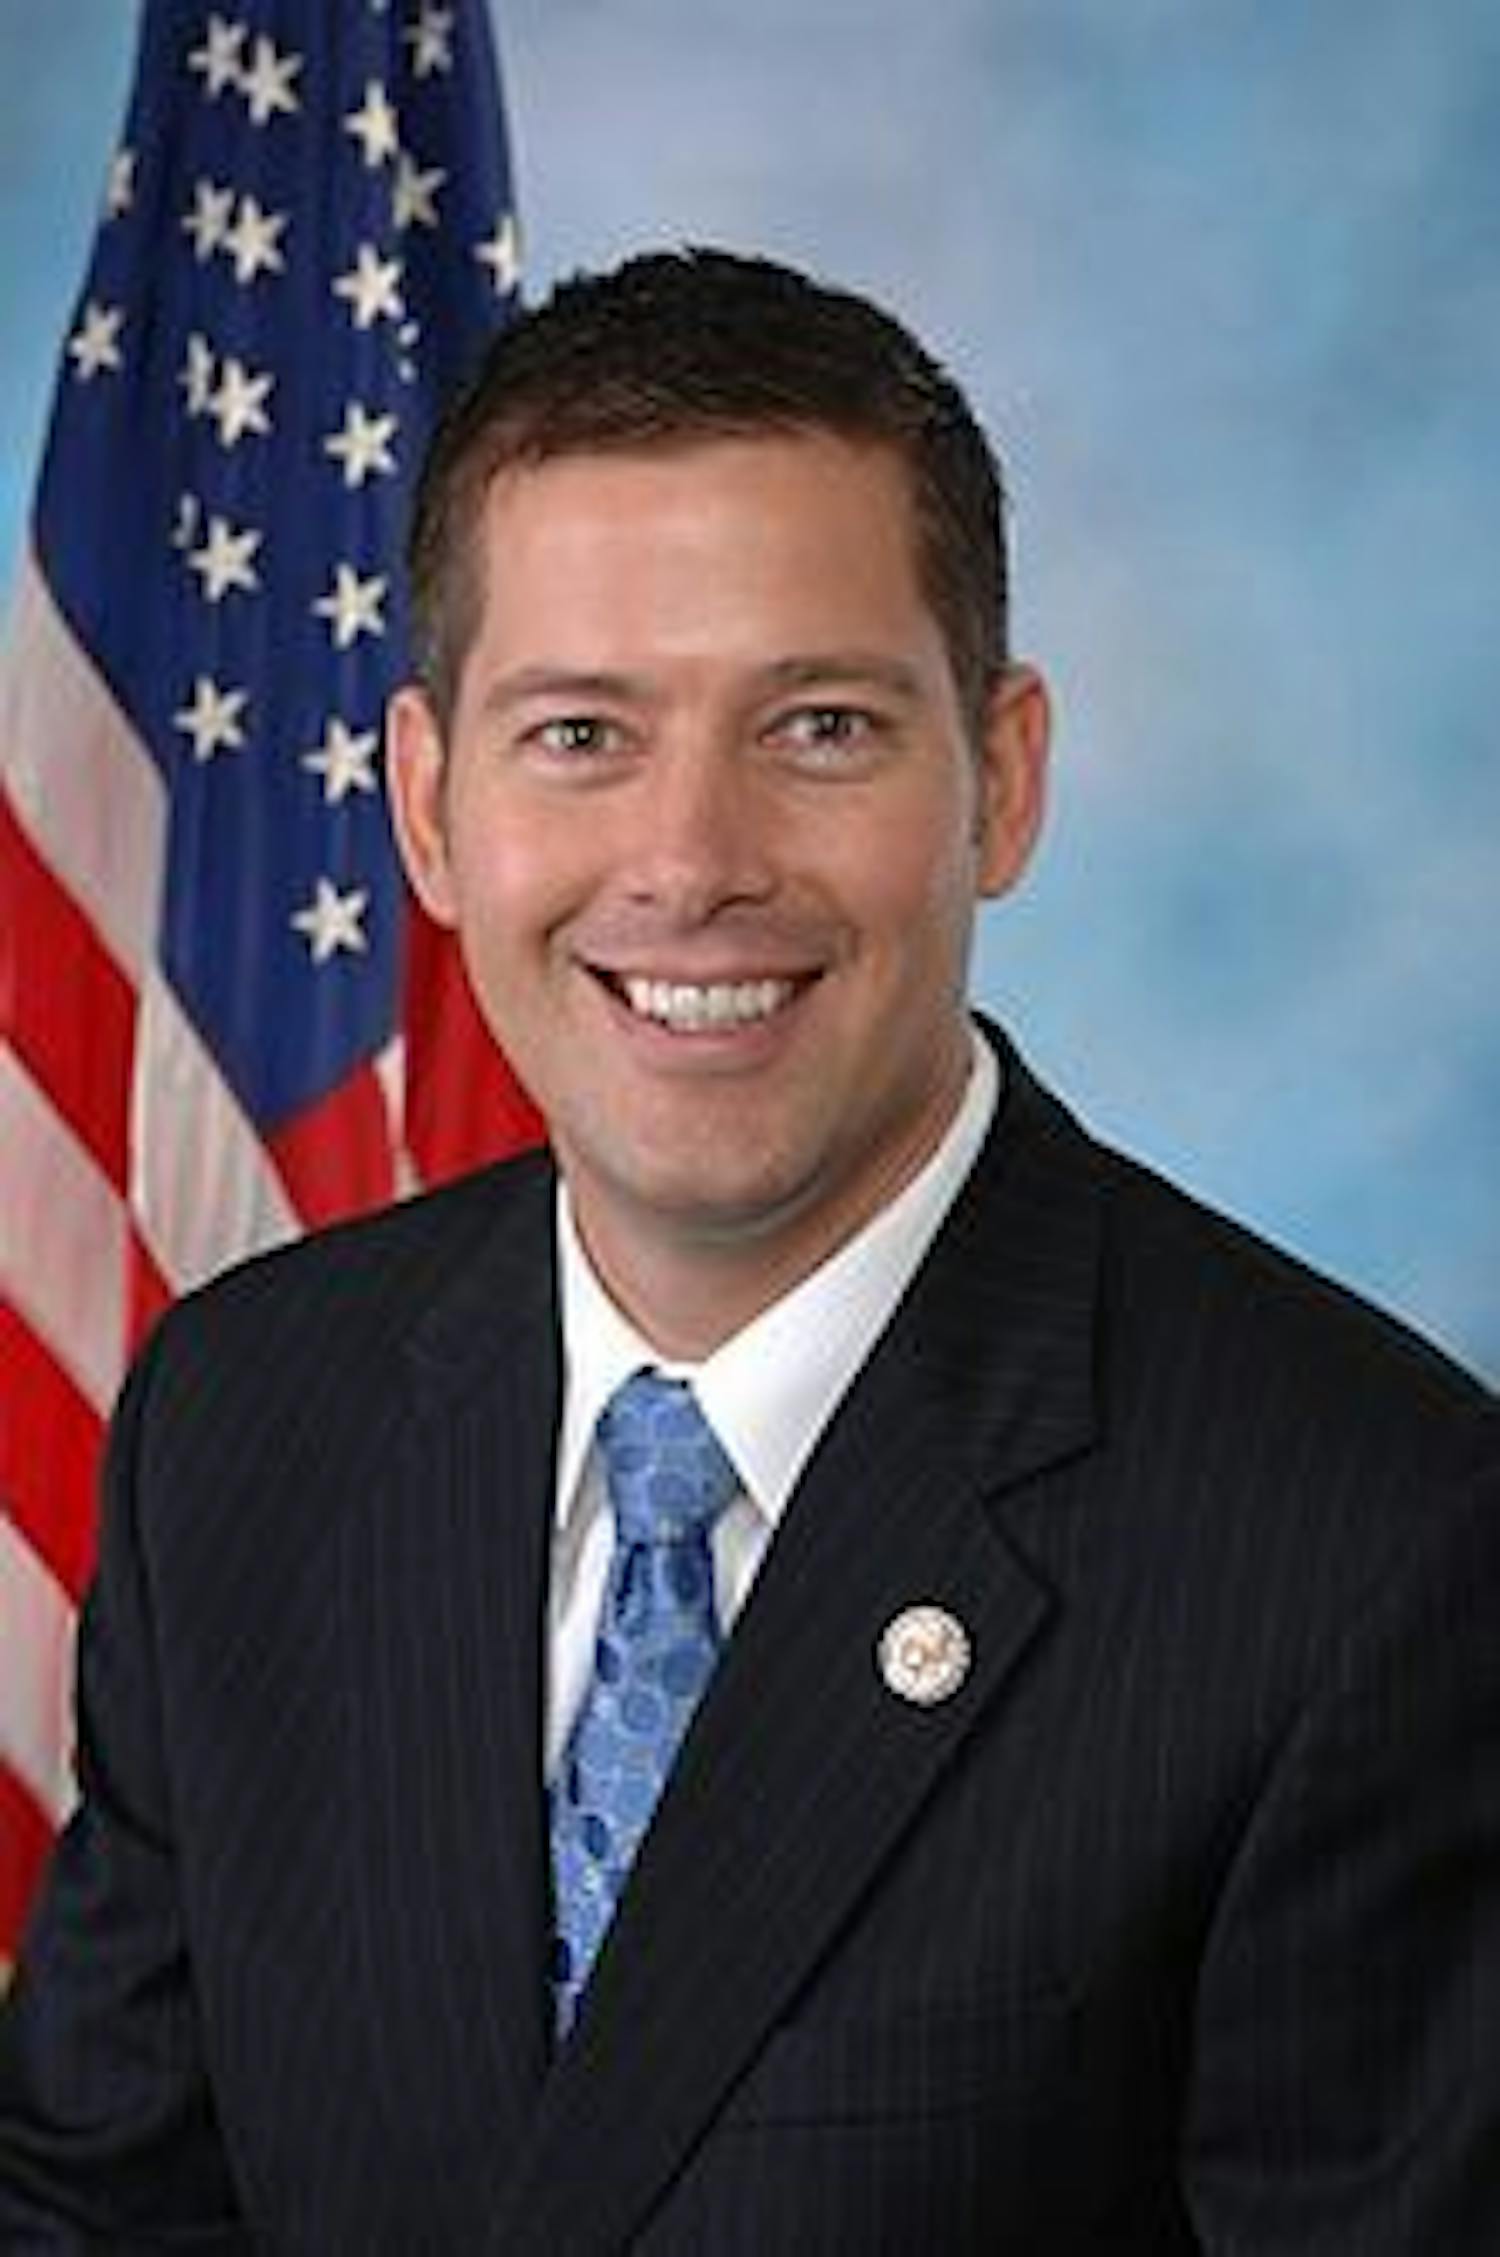 U.S. Rep. Sean Duffy, seen as a front-runner in Wisconsin’s 2018 senate election, said Thursday that he would not be running. Democratic U.S. Sen. Tammy Baldwin’s opponent is now up in the air.